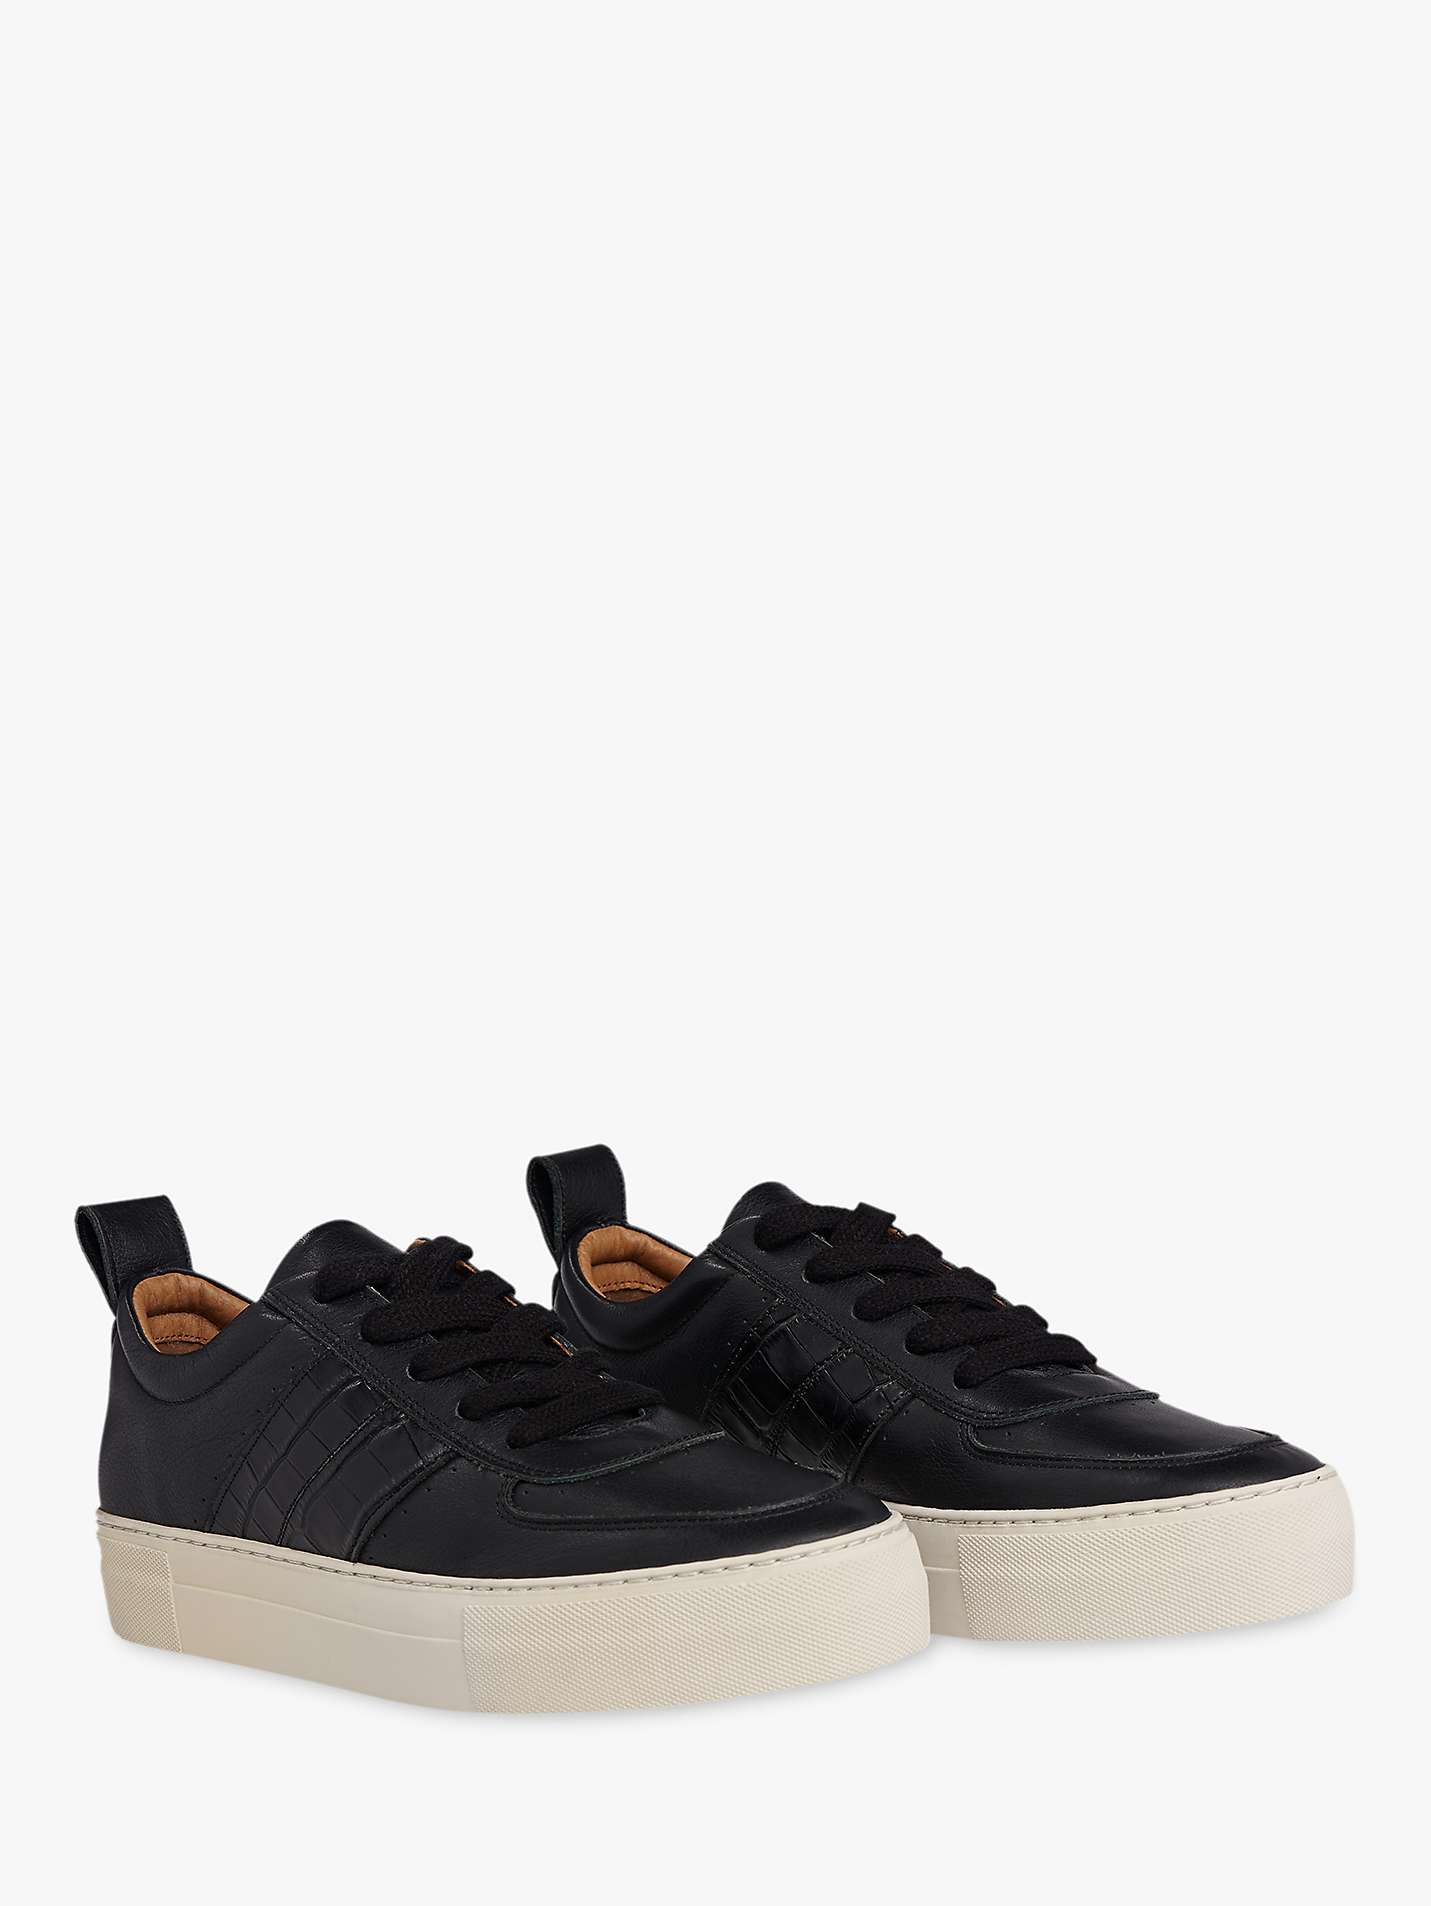 Buy Whistles Anna Deep Sole Trainers, Black Leather Online at johnlewis.com